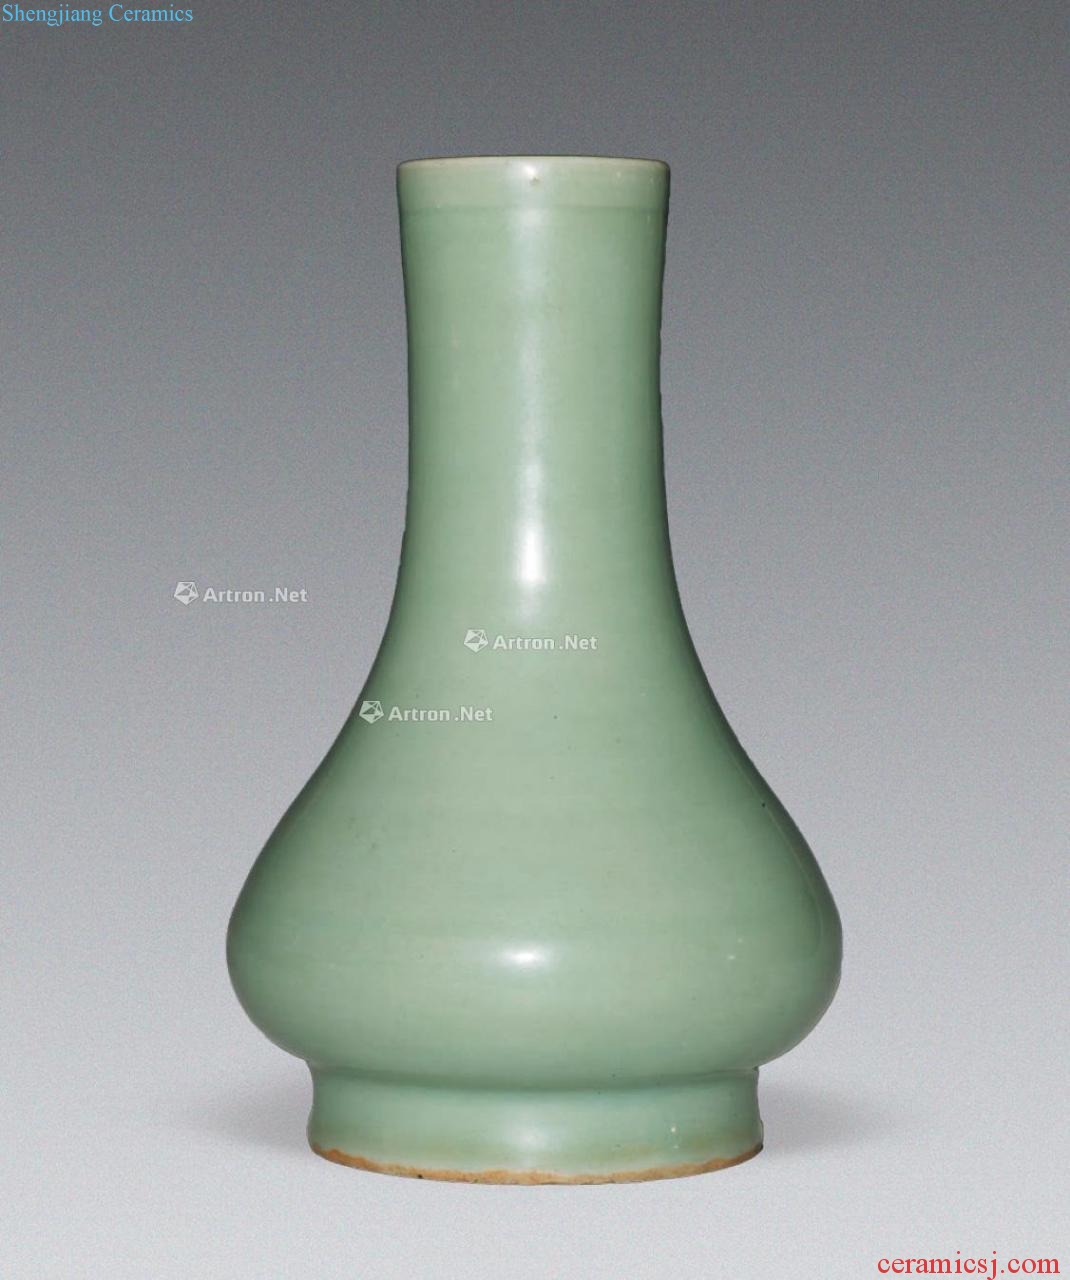 The southern song dynasty longquan in a bottle